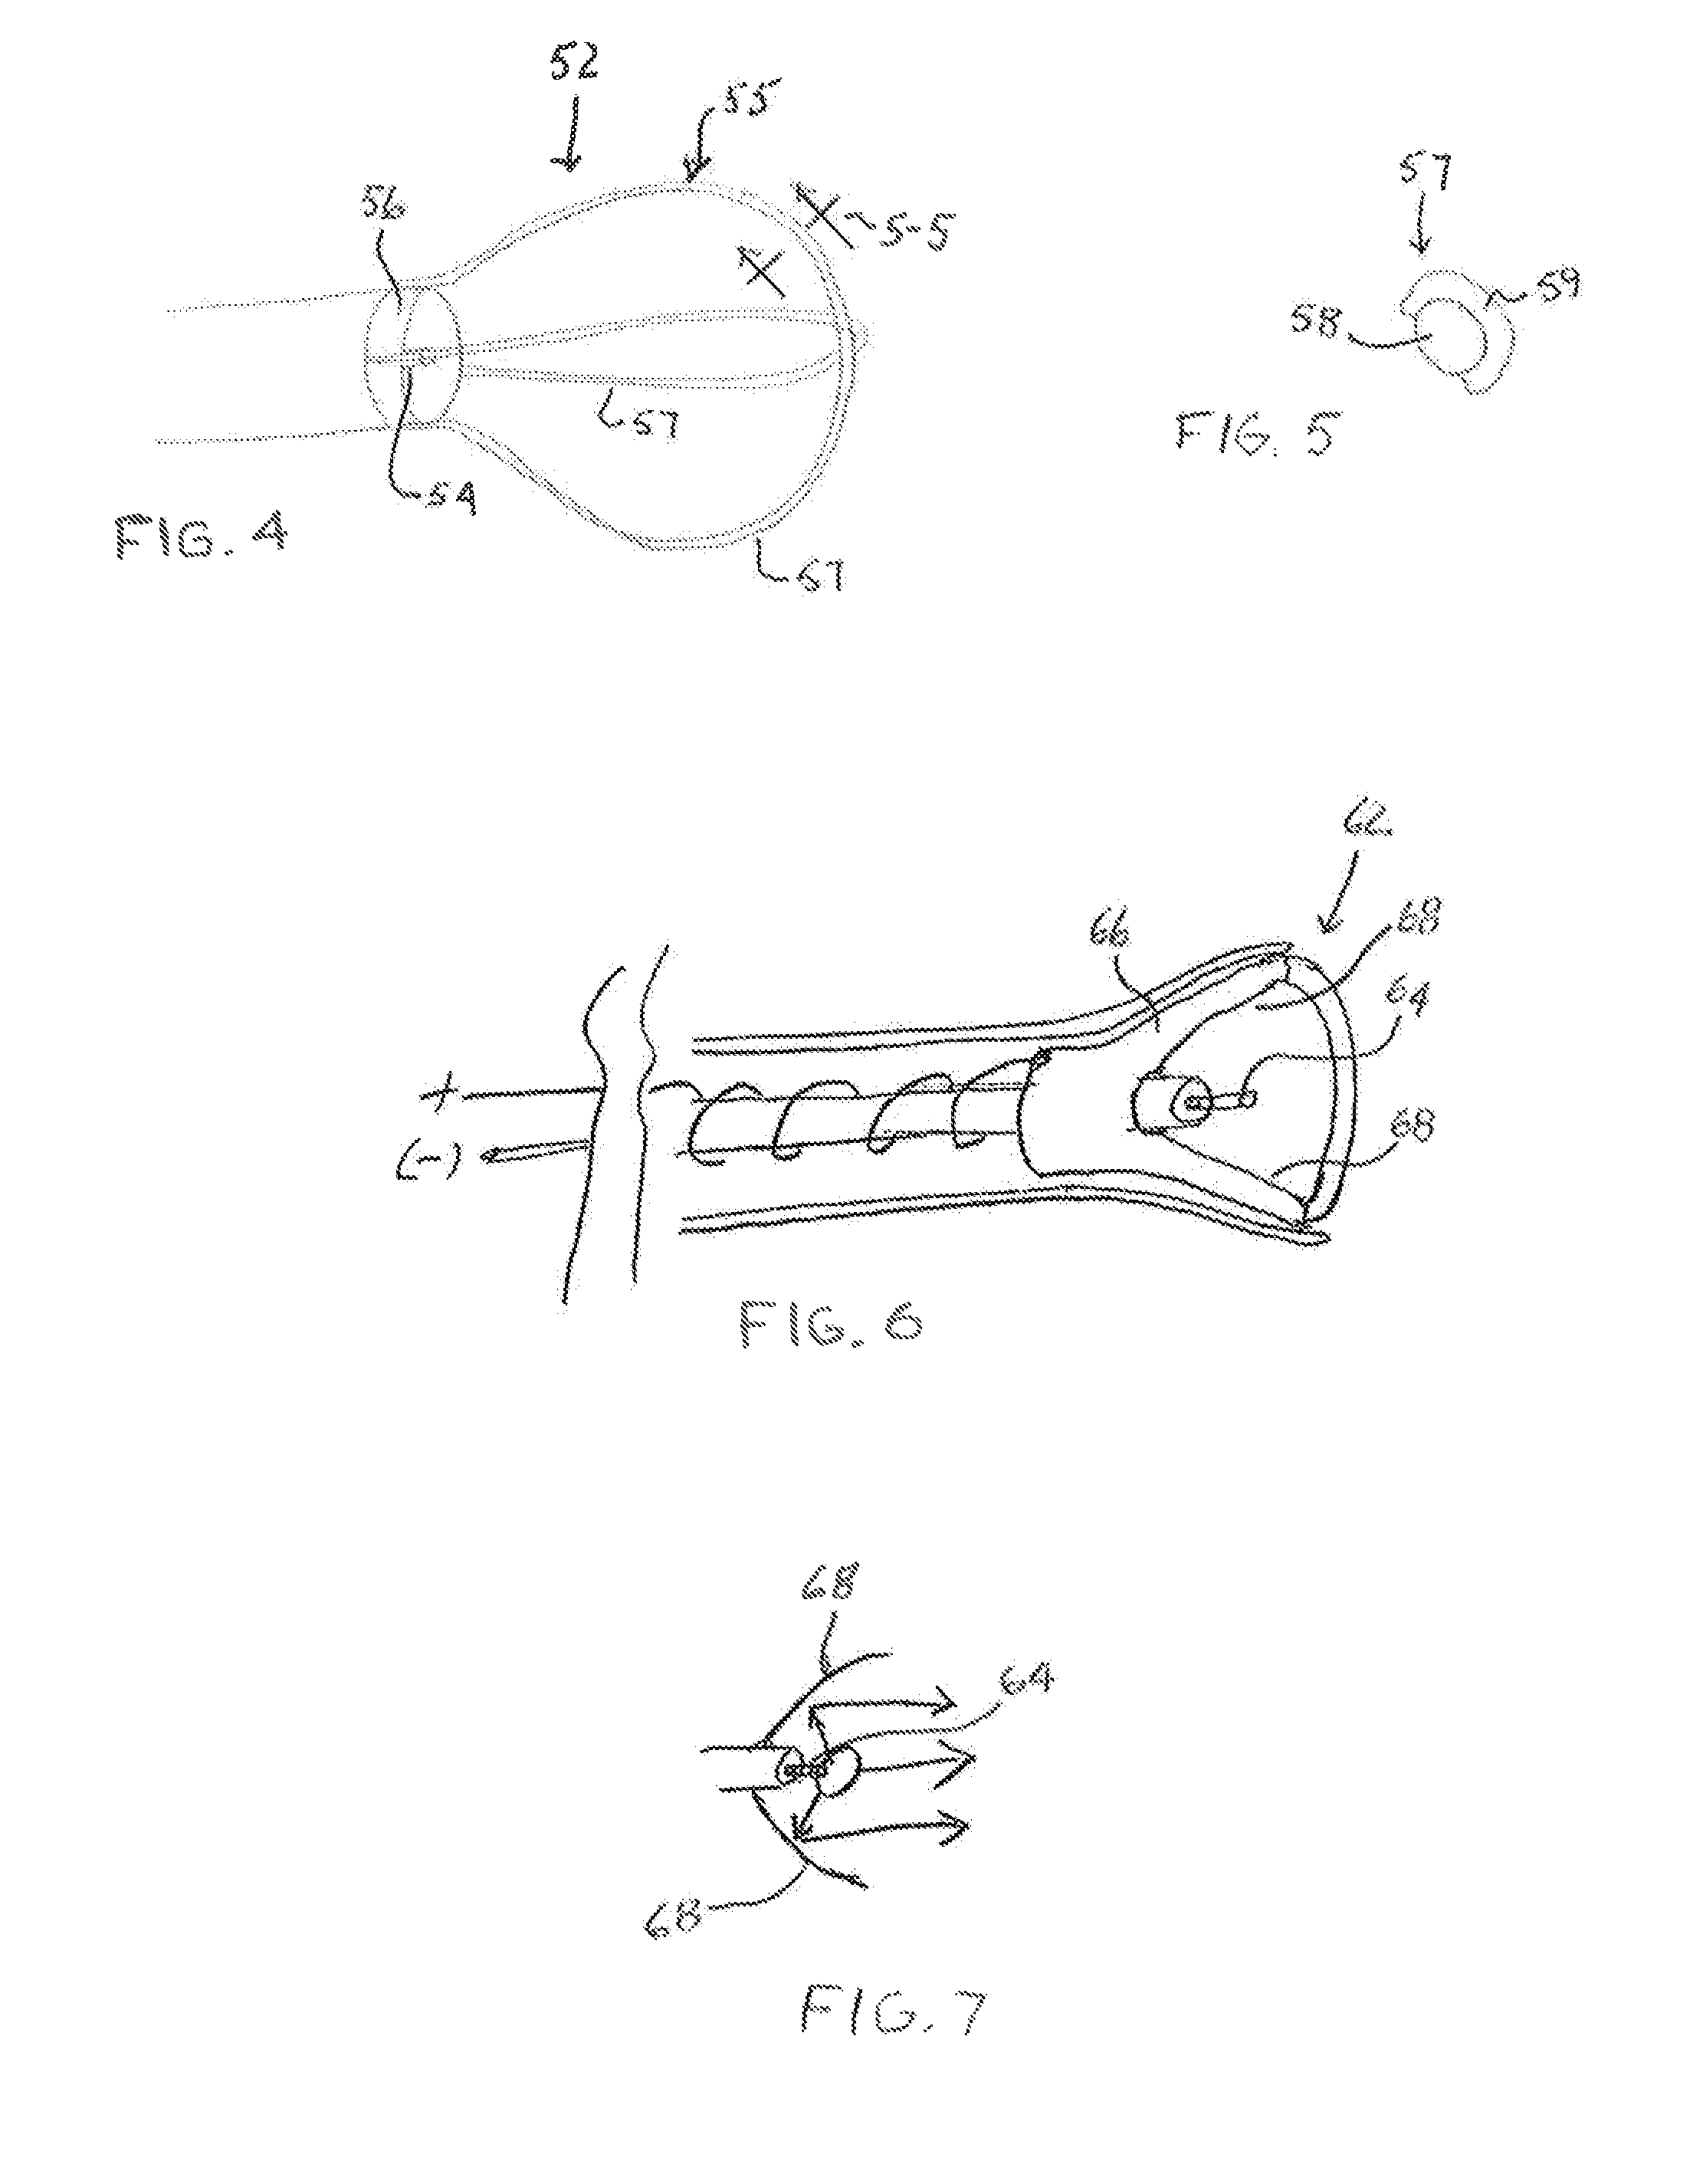 Shock wave valvuloplasty device with moveable shock wave generator